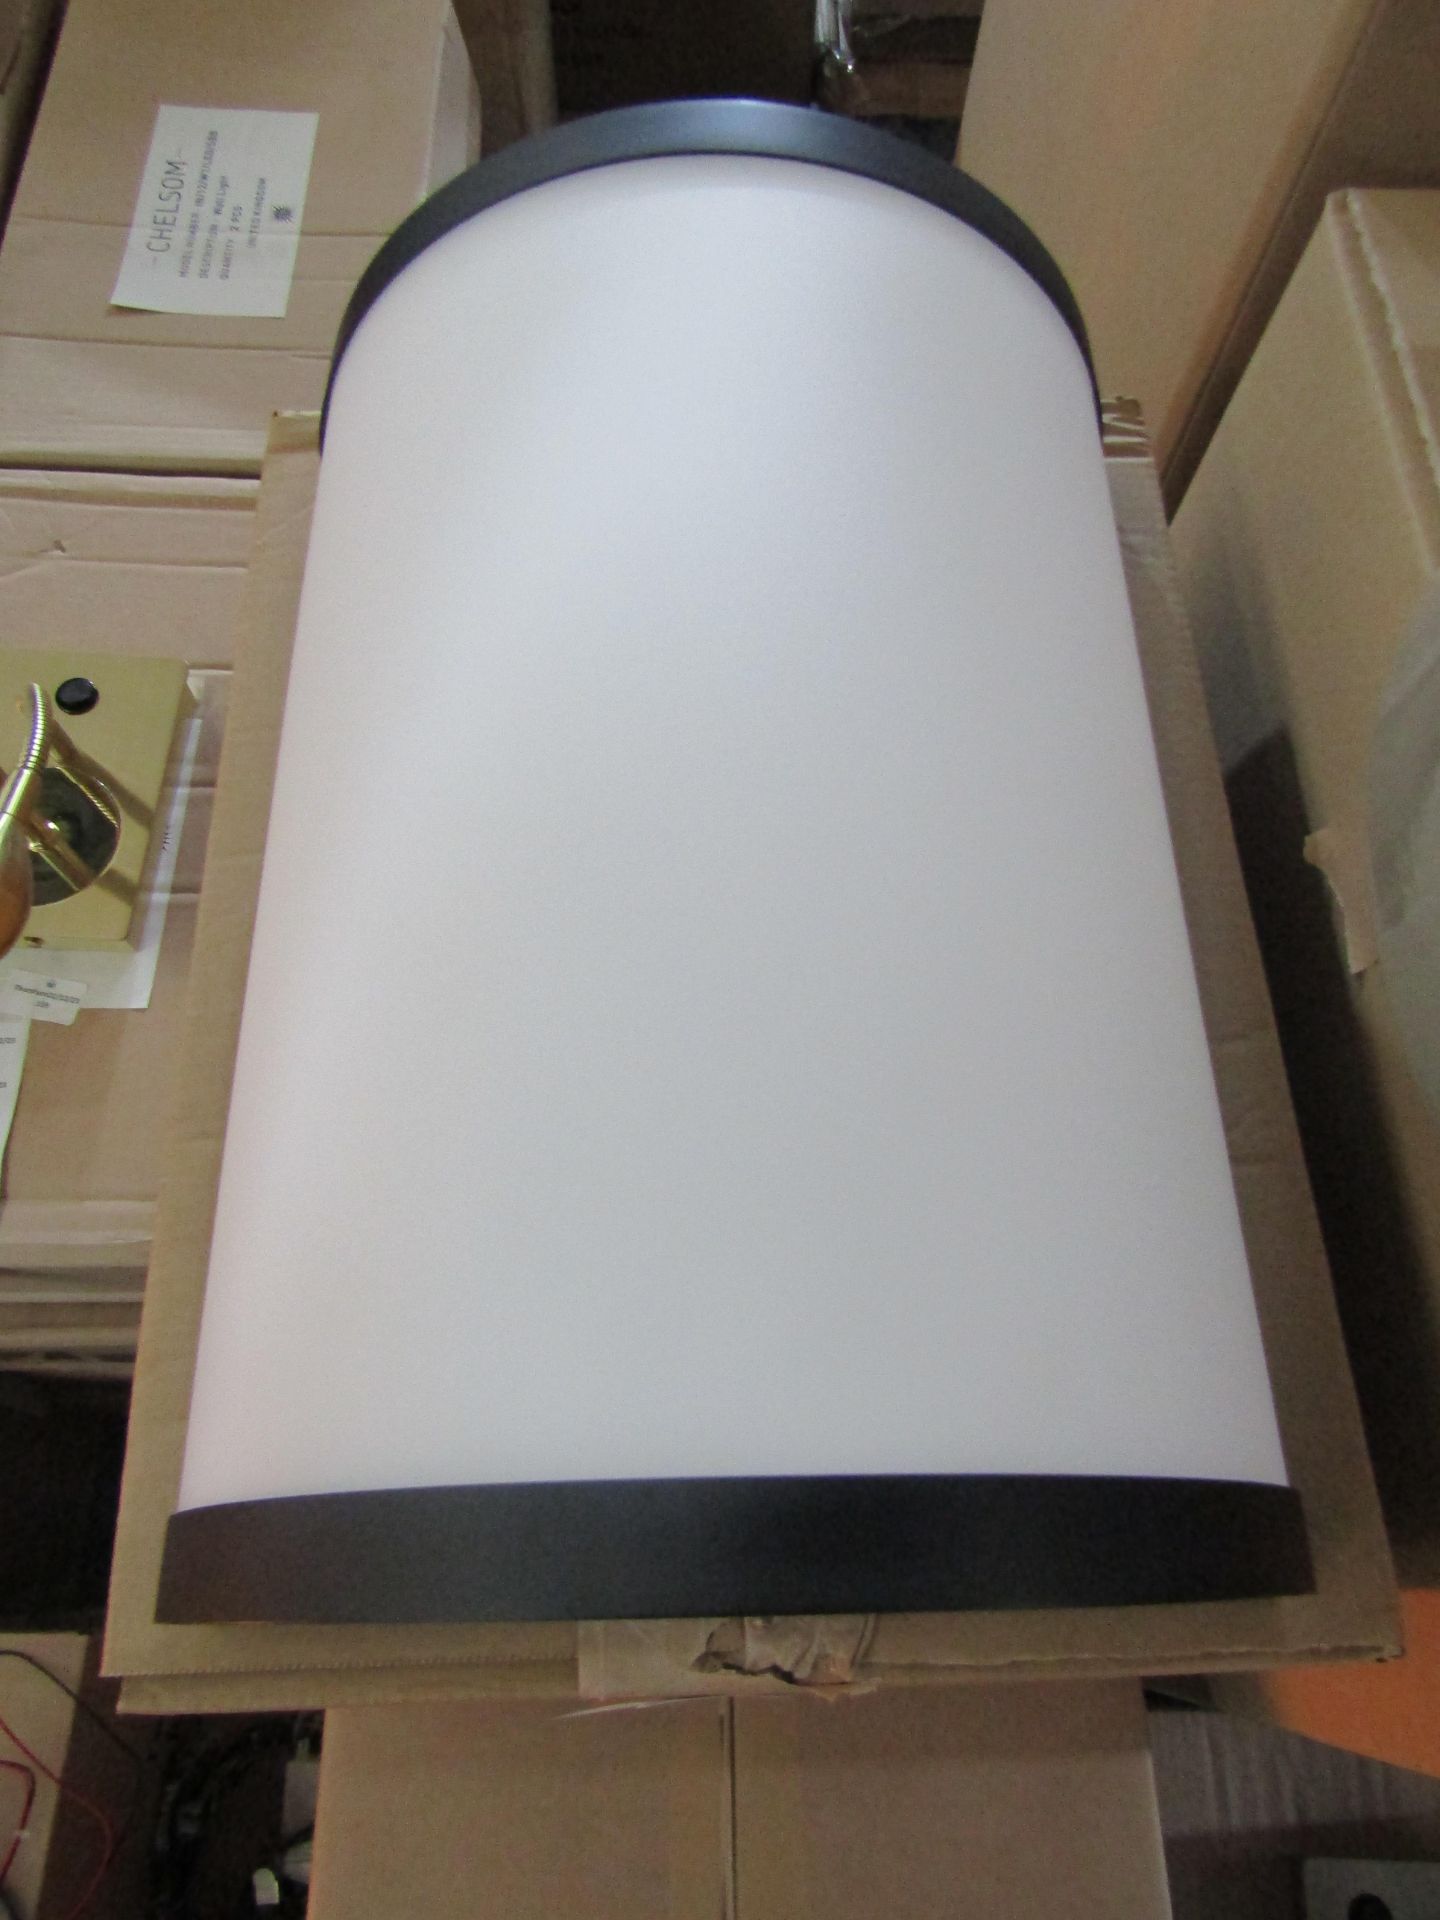 Chelsom Space Wall Light Black. Model Number: SA/30/W2/19168 - New & Boxed.